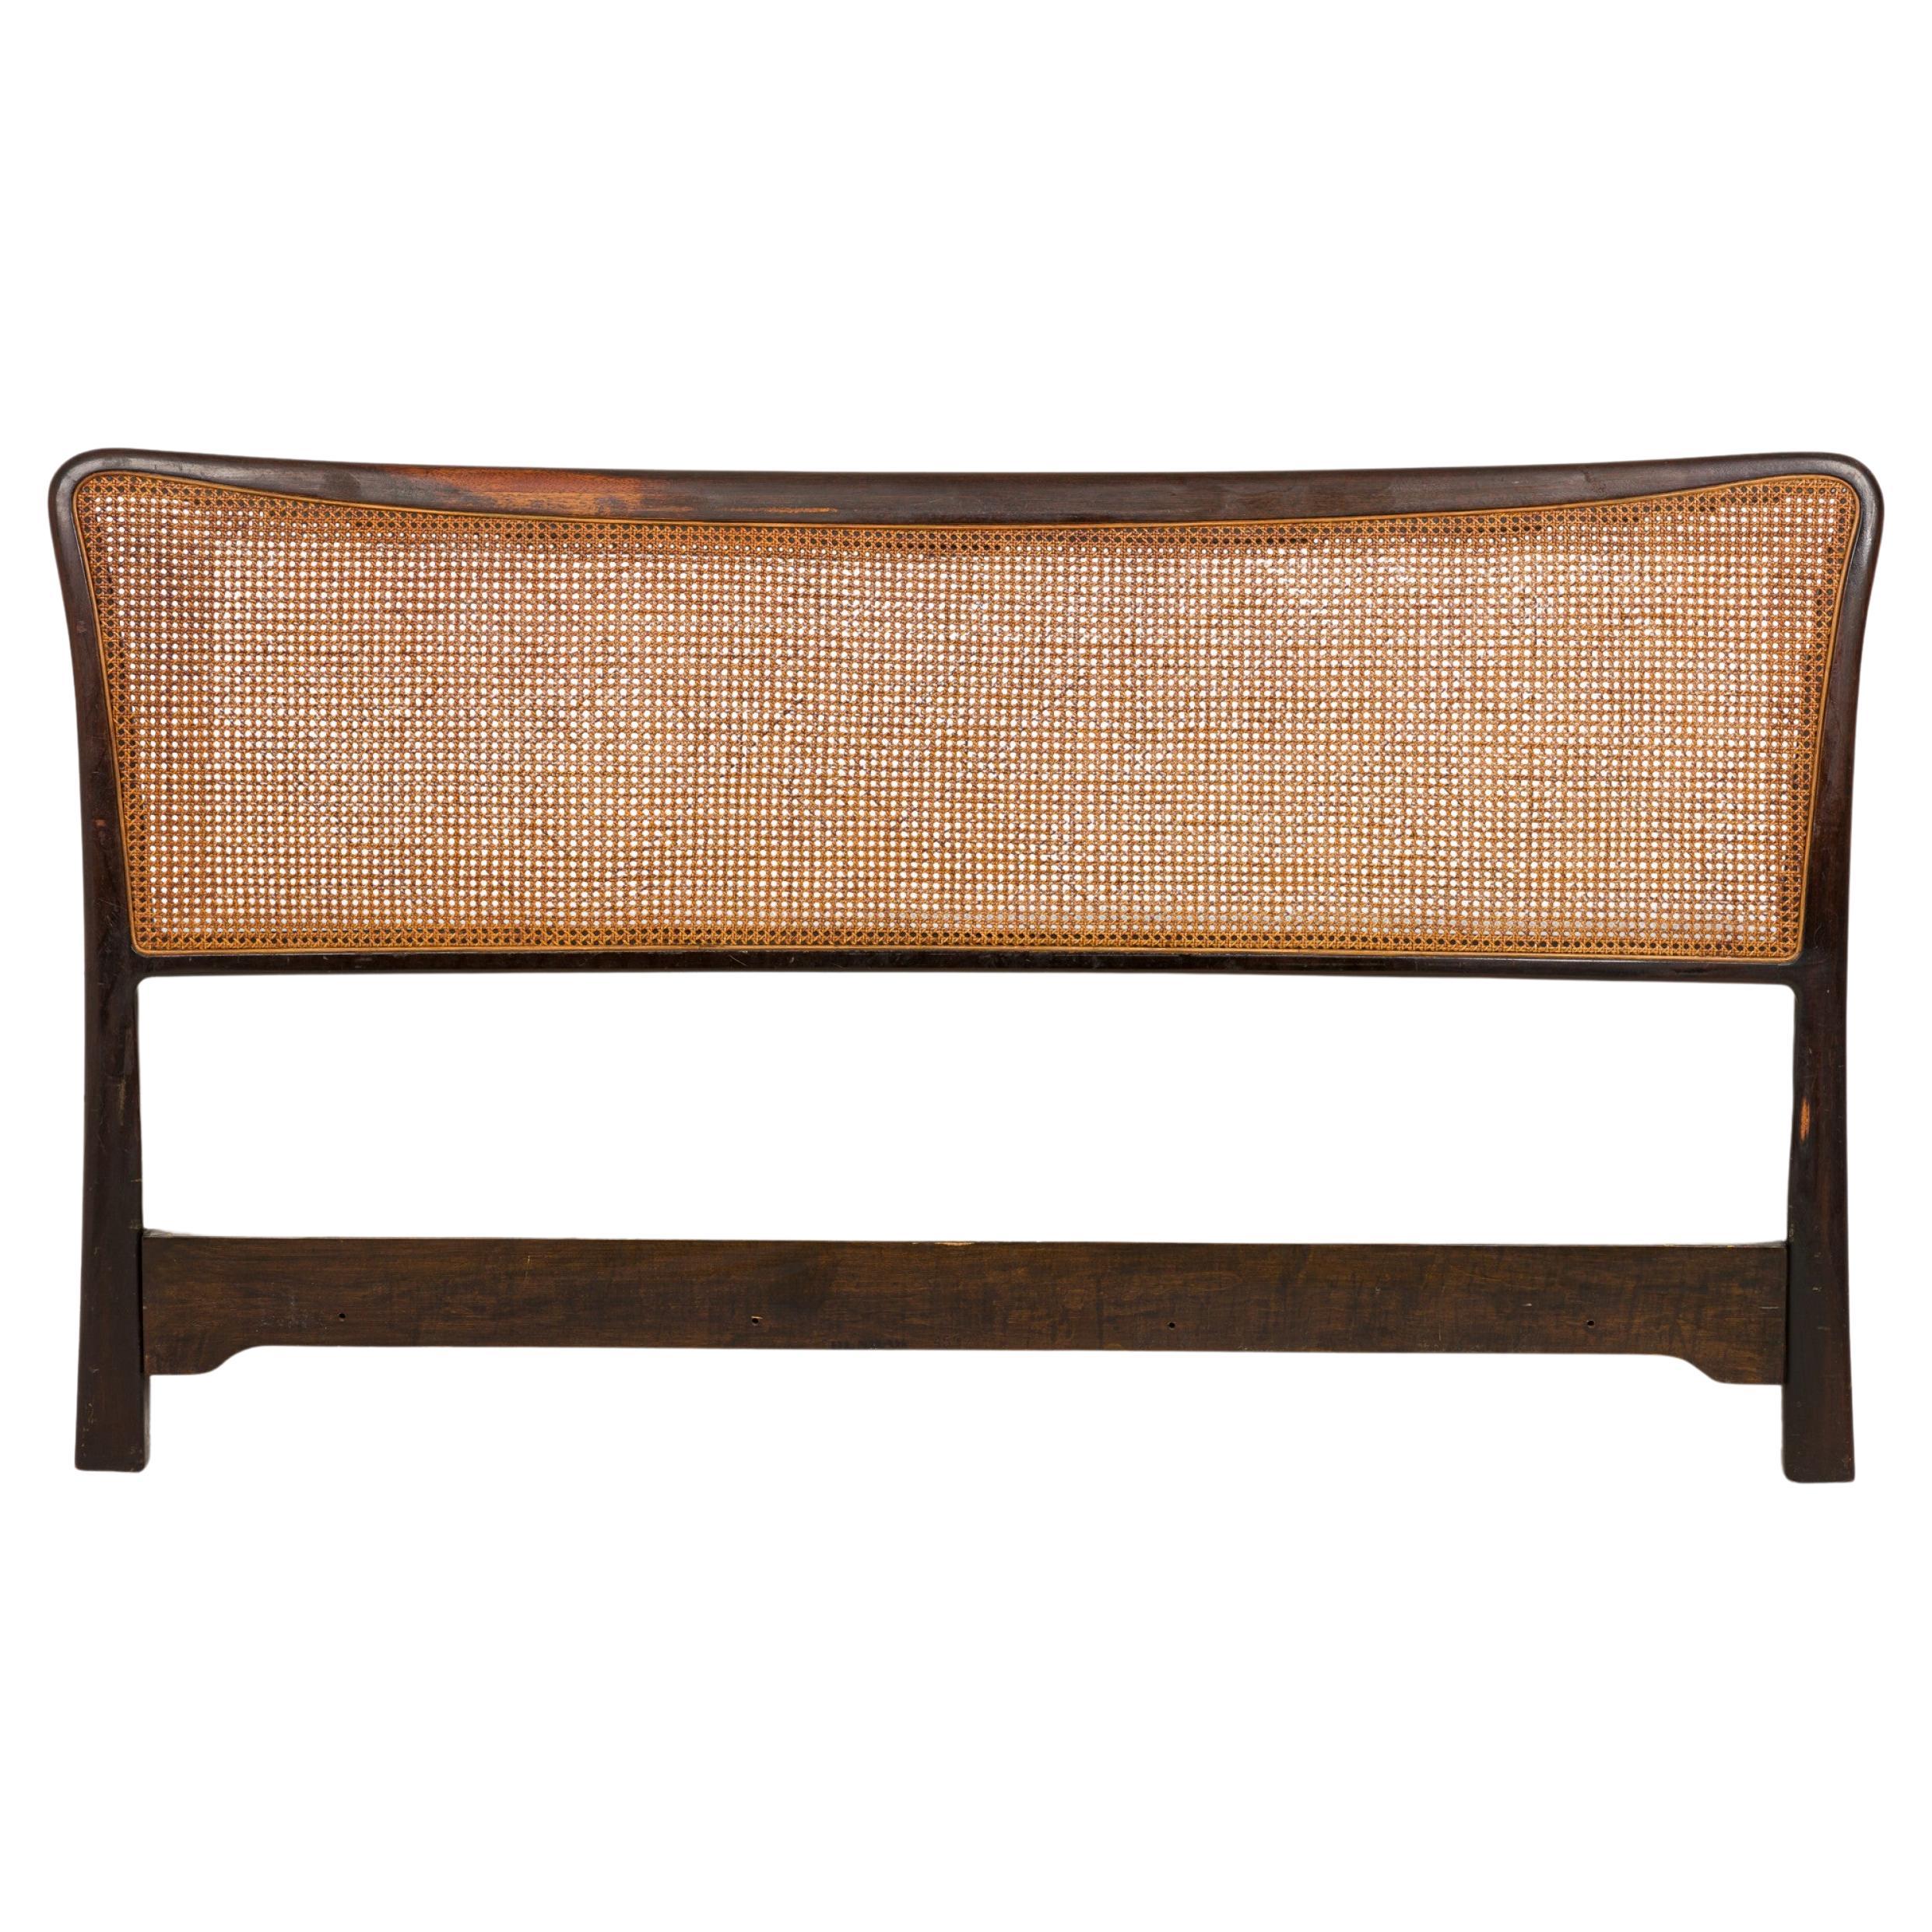 Edward Wormley for Dunbar Wooden Frame Caned Panel Full-Size Bed Headboard